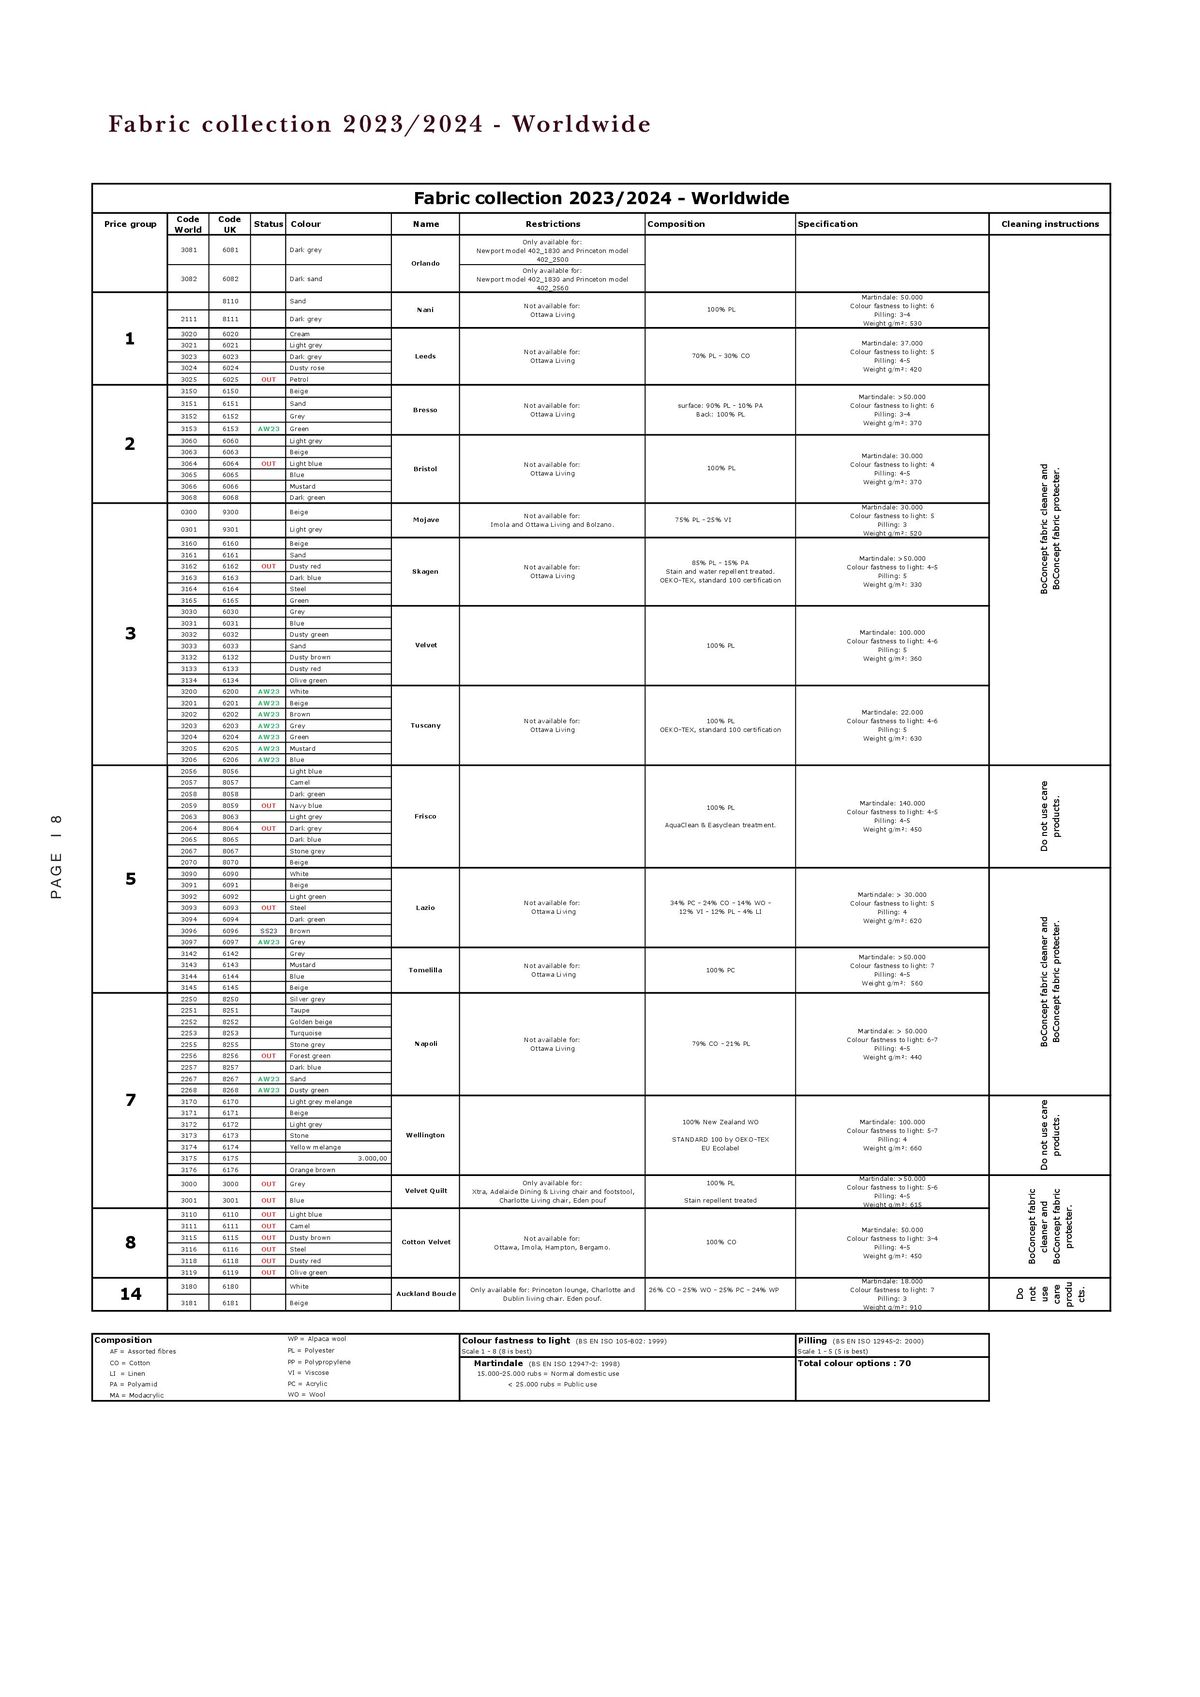 Catalogue Explore our contract materials guide, page 00008